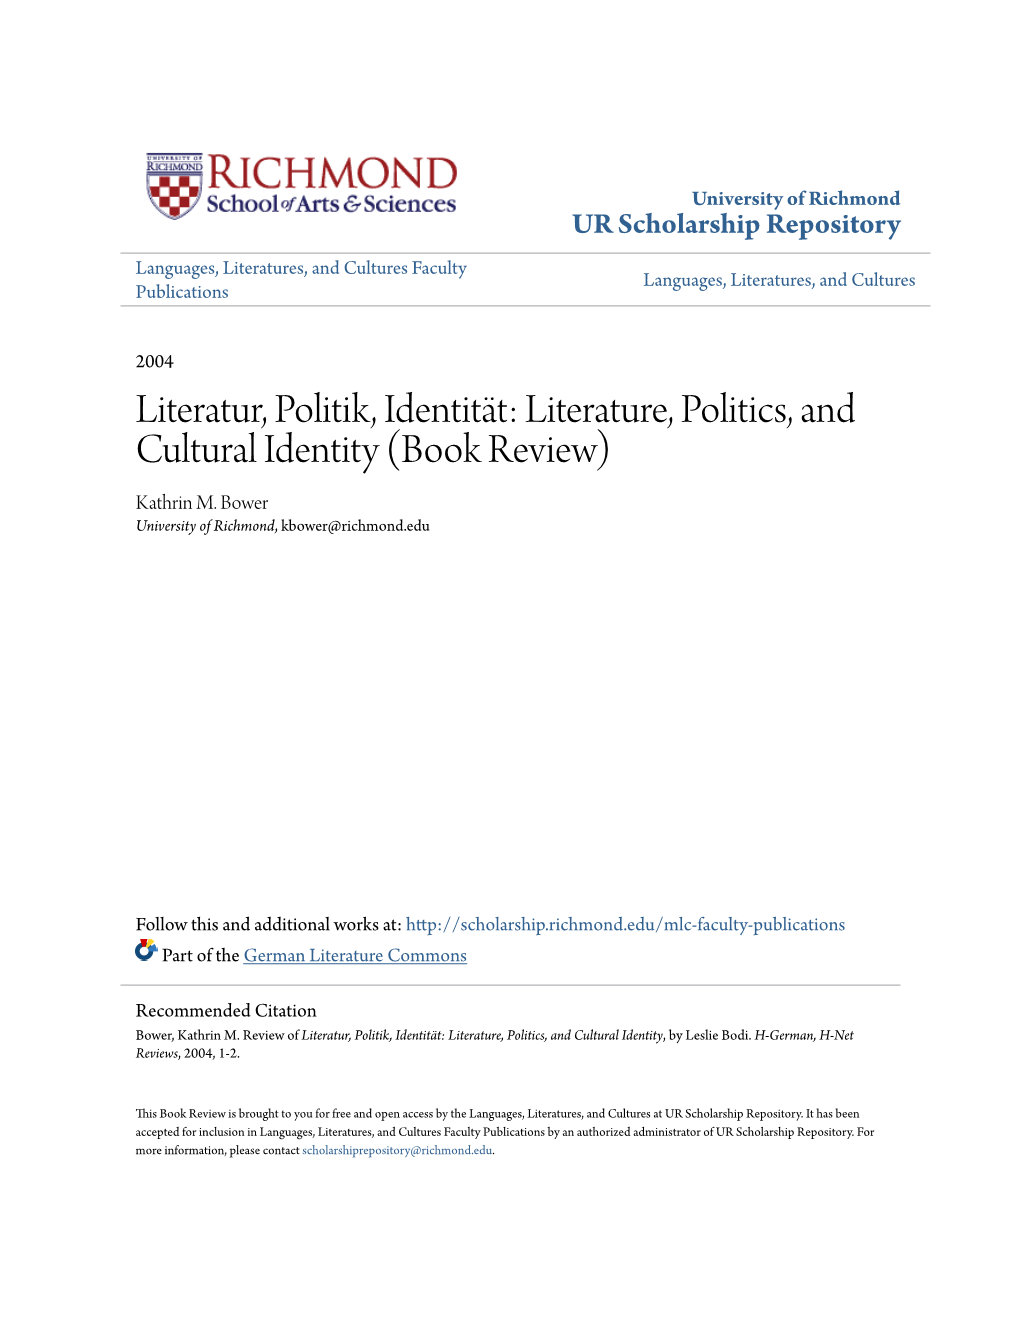 Literature, Politics, and Cultural Identity (Book Review) Kathrin M